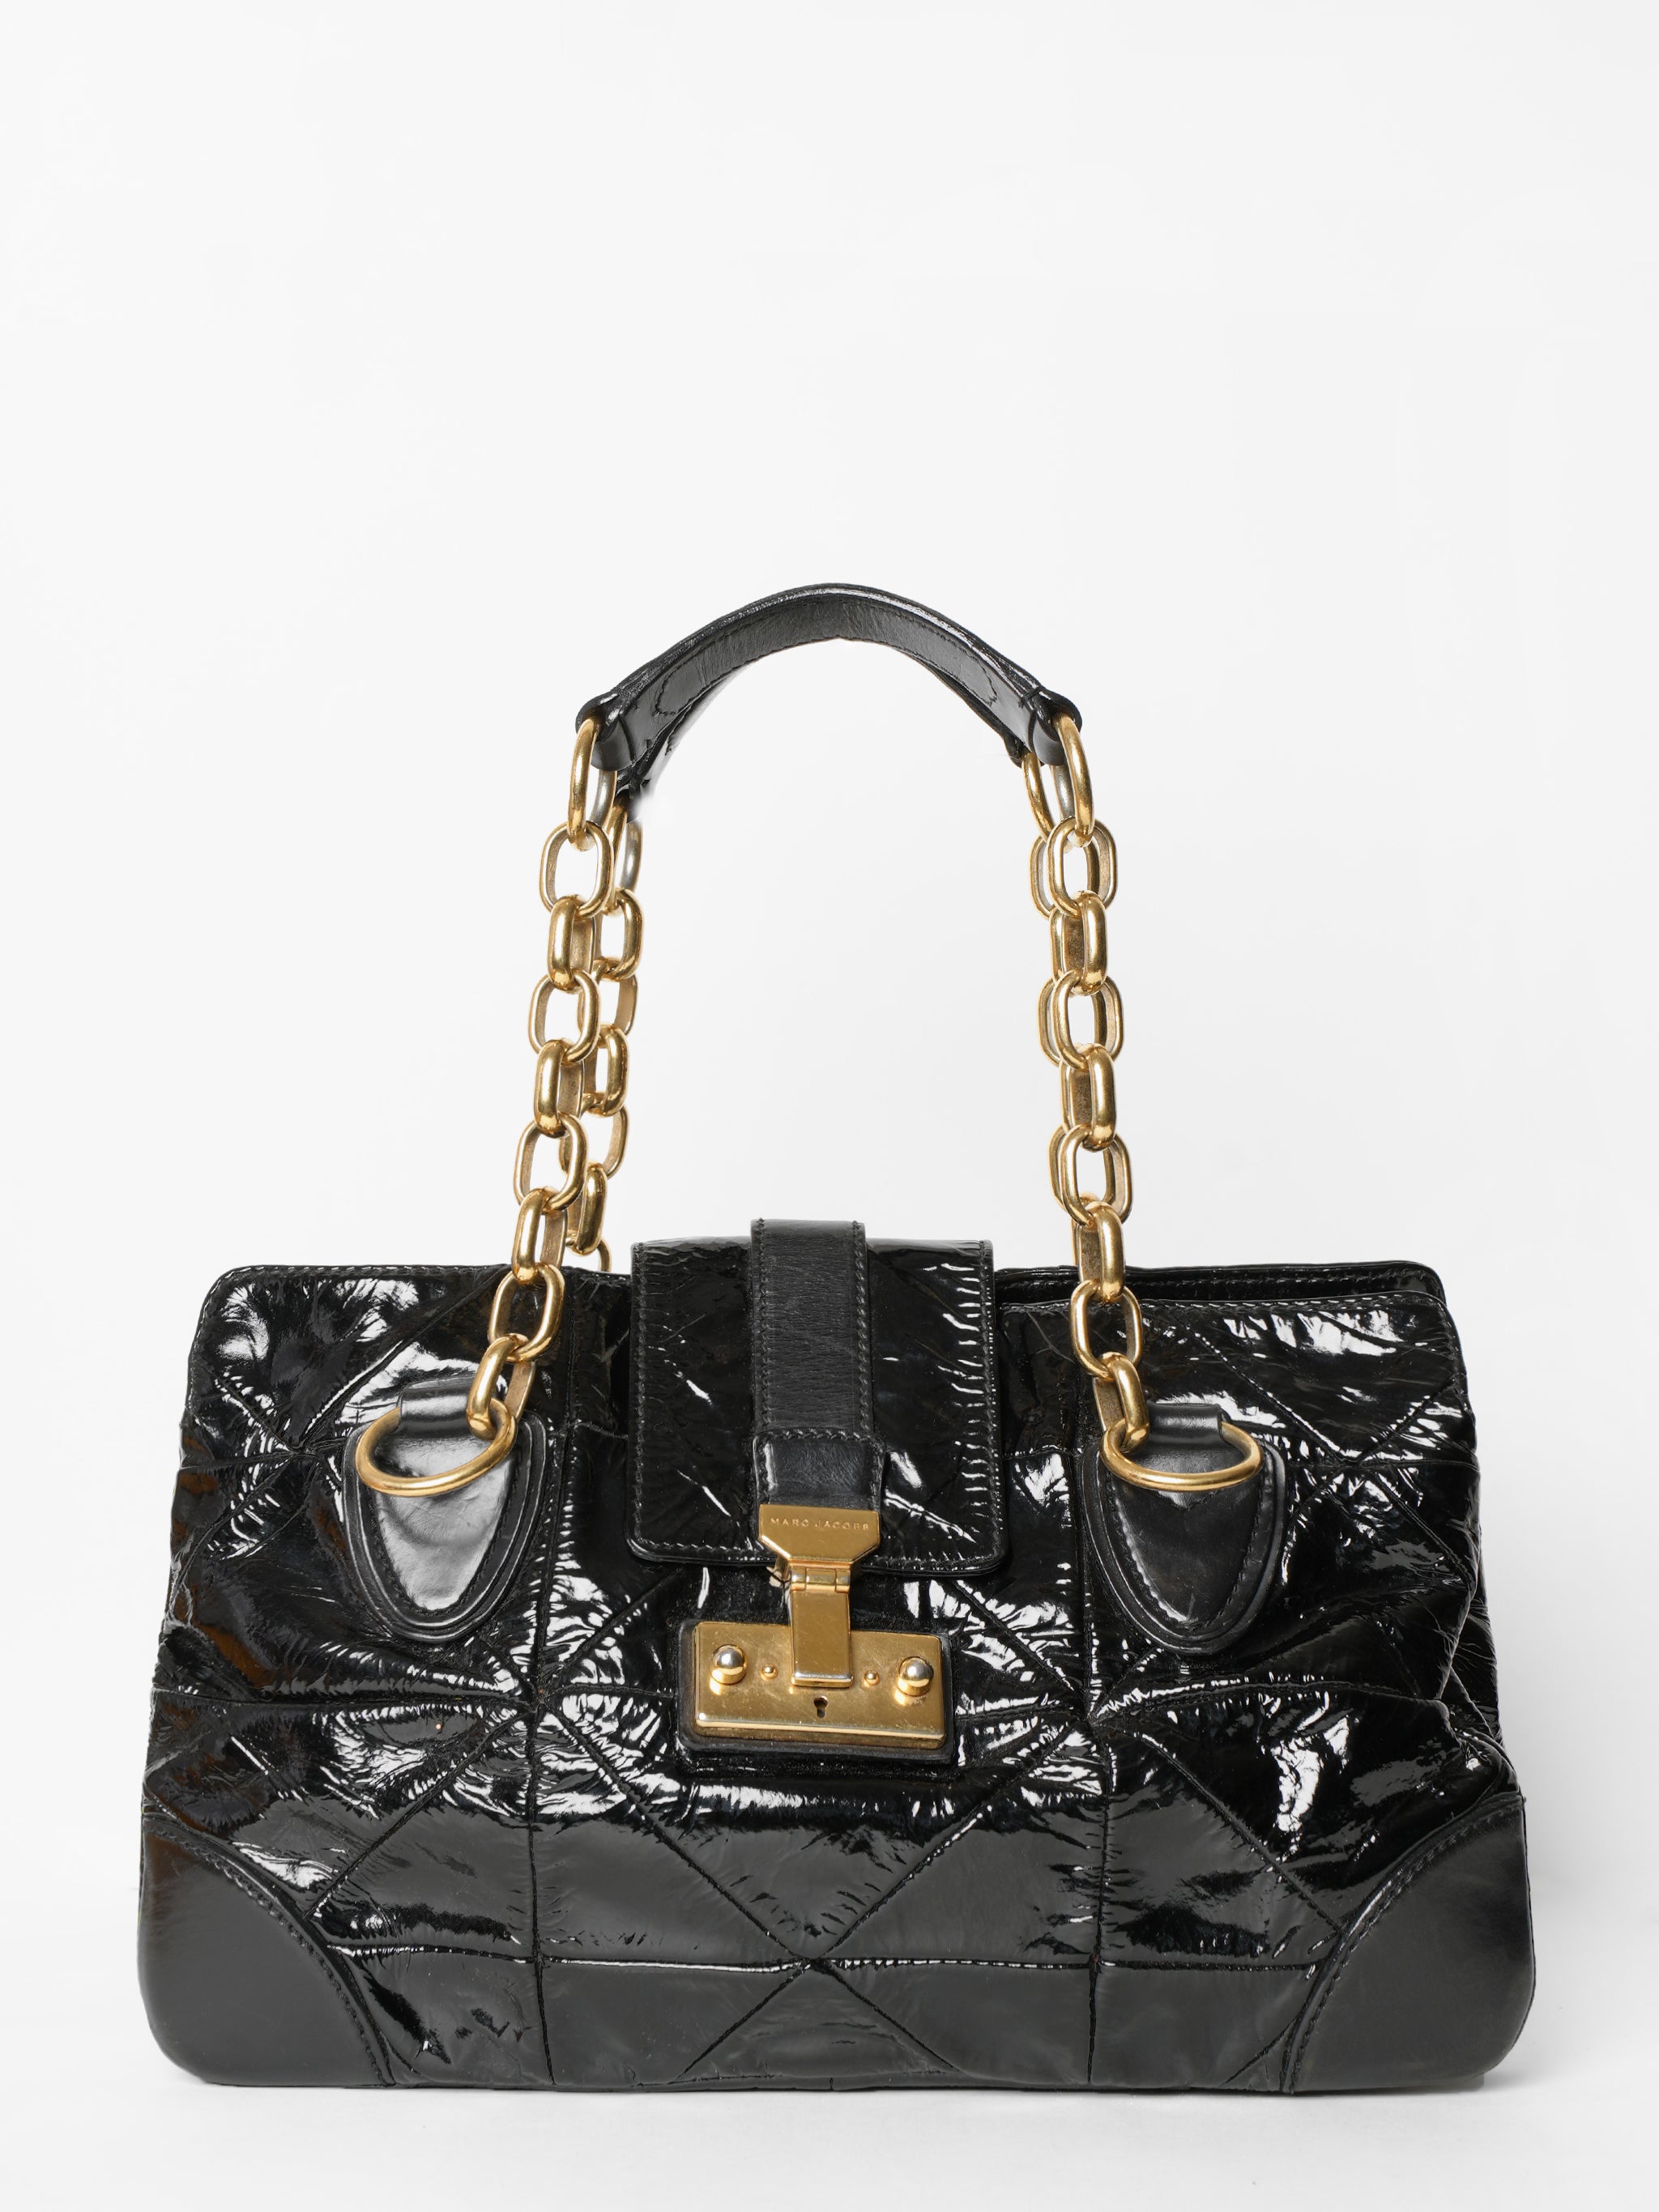 Marc Jacobs Patent leather bag